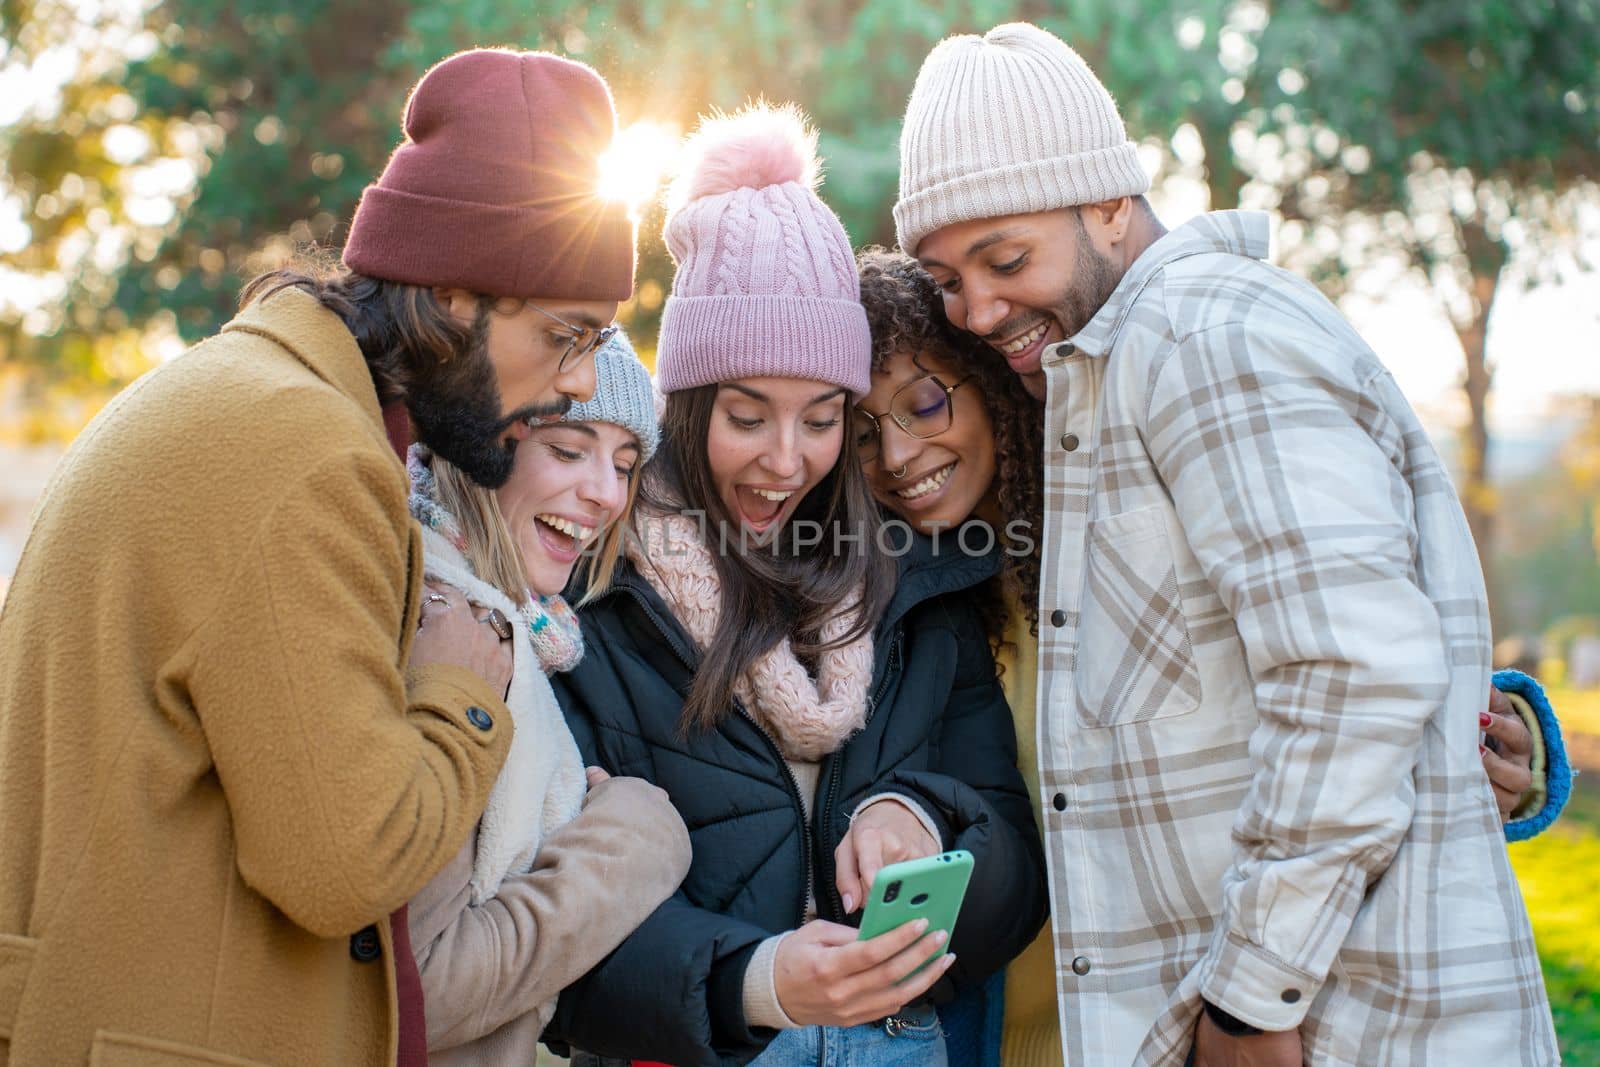 Big group of young multiracial friends looking cell phone excited happy smiling outdoors. Concept of millennial people addicted to technology. Social Media communication generation Z.